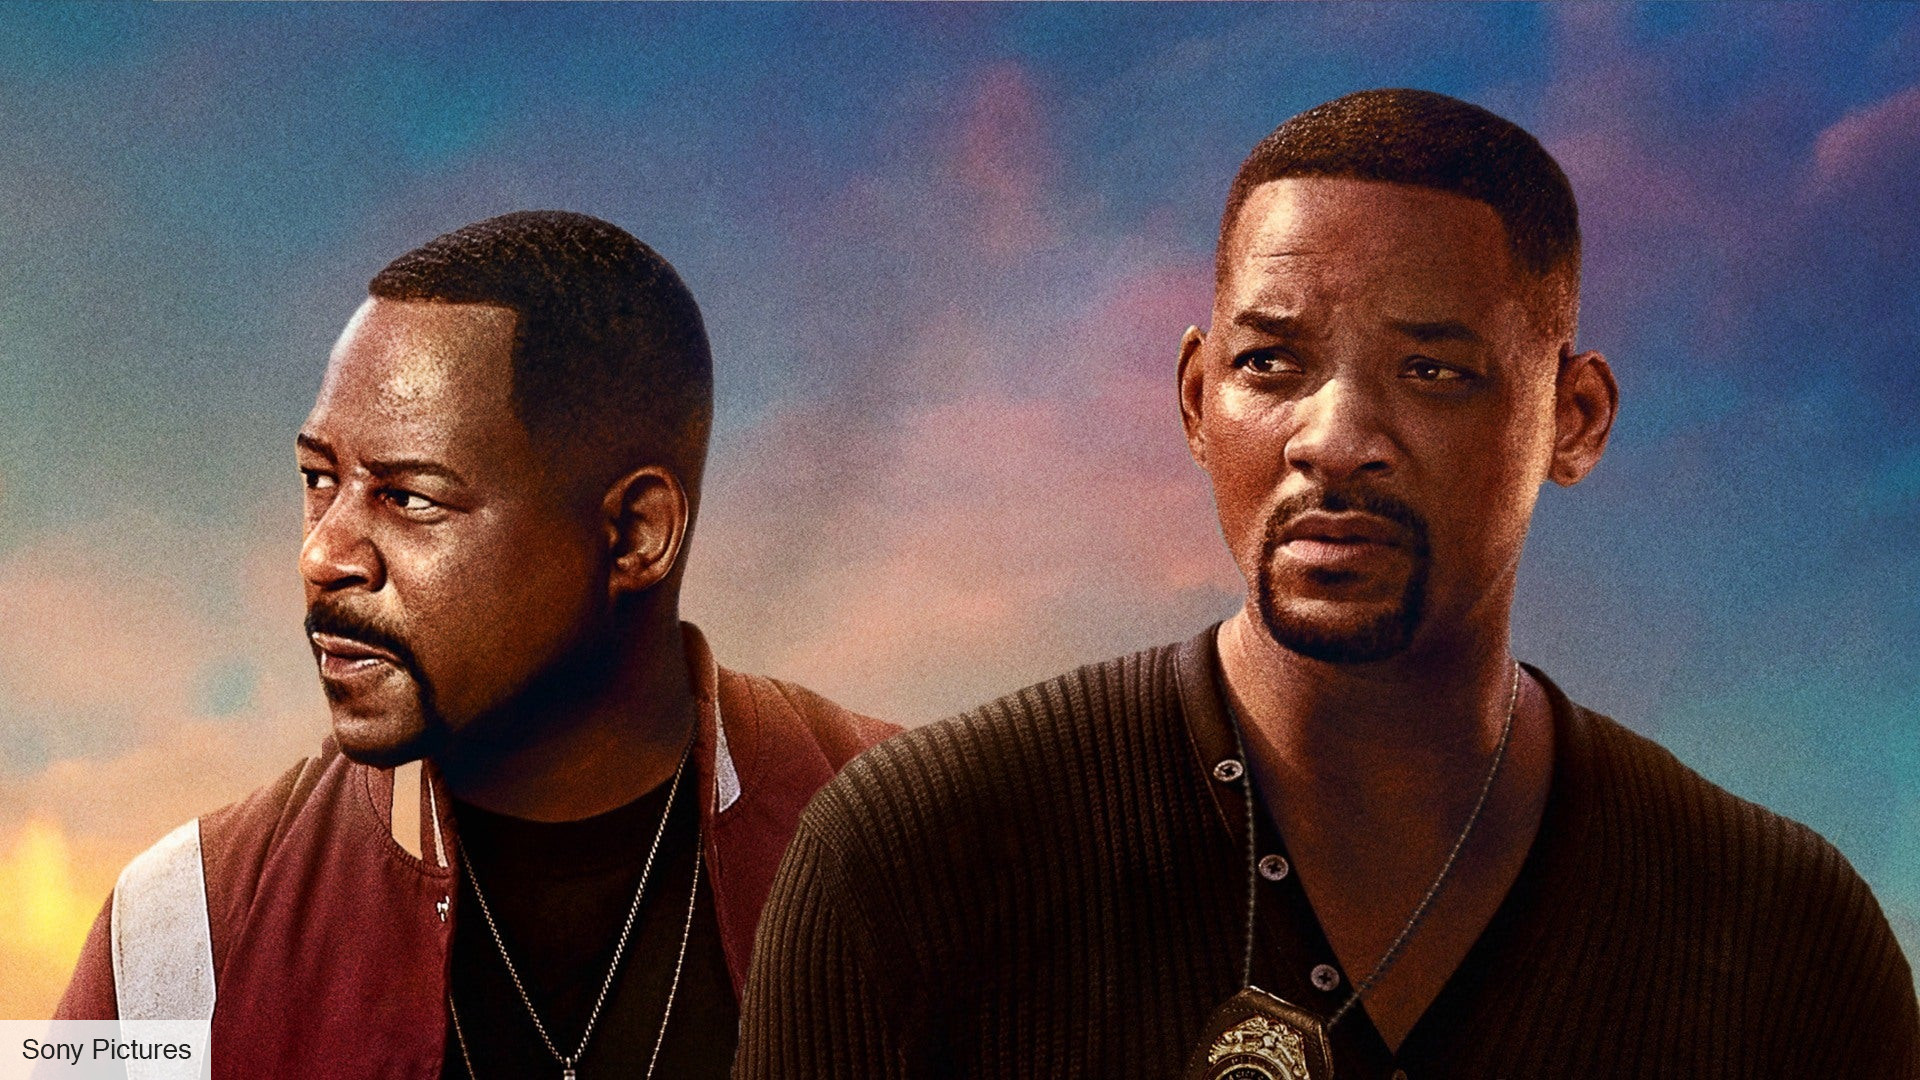 Bad Boys 4: Release Date, Cast, Trailer, Plot, where to watch?